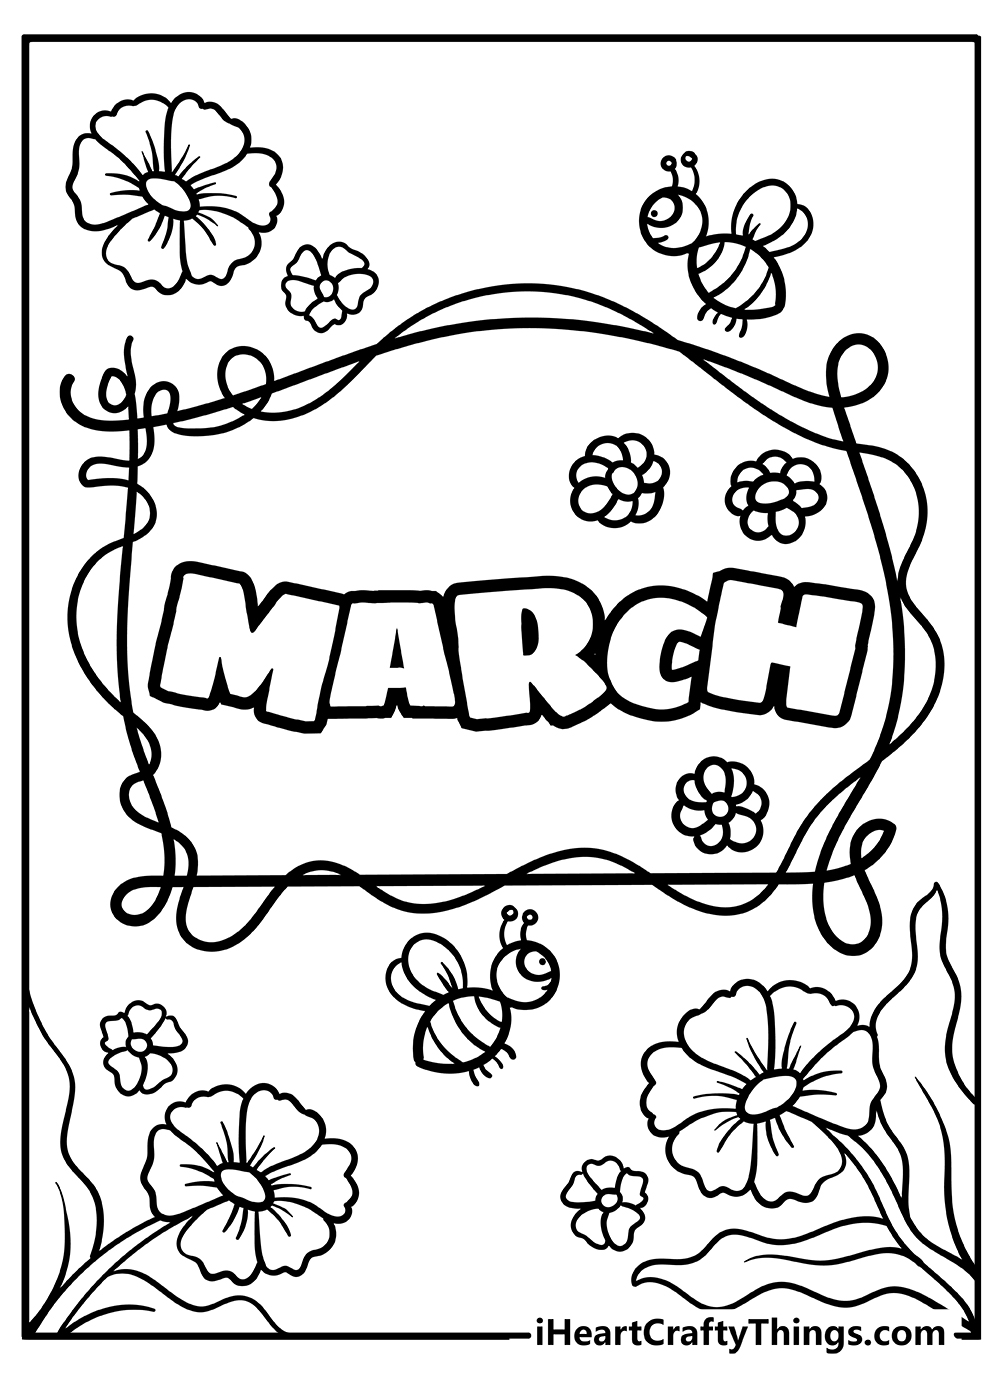 March Coloring Book for kids free printable